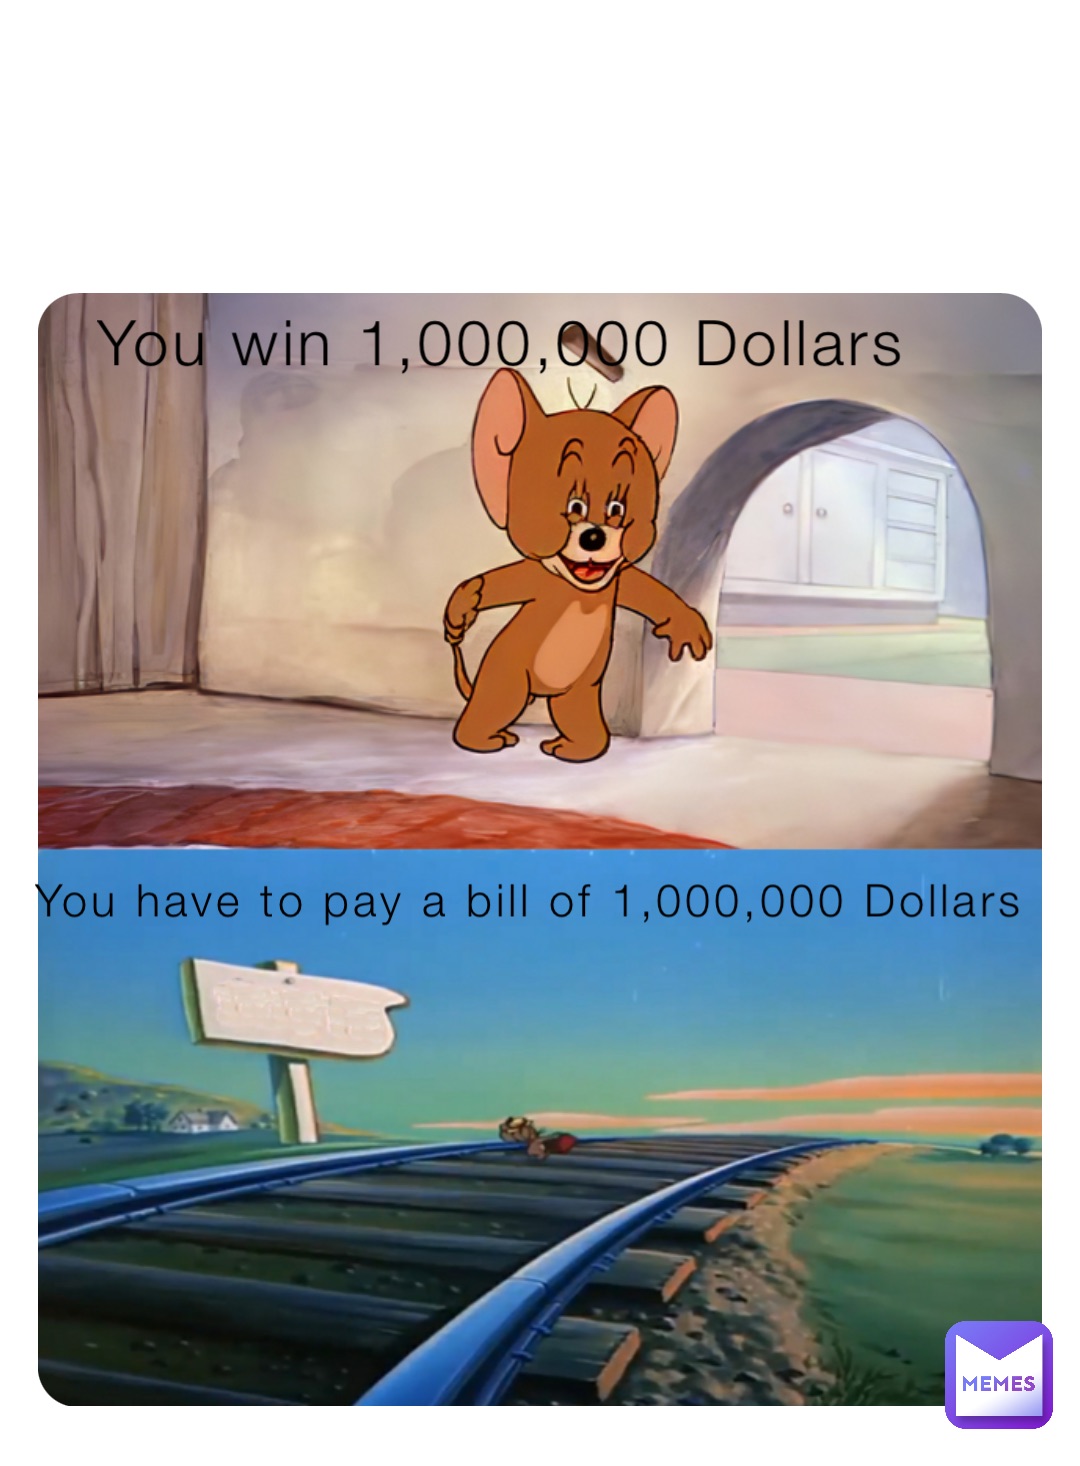 You win 1,000,000 Dollars You have to pay a bill of 1,000,000 Dollars